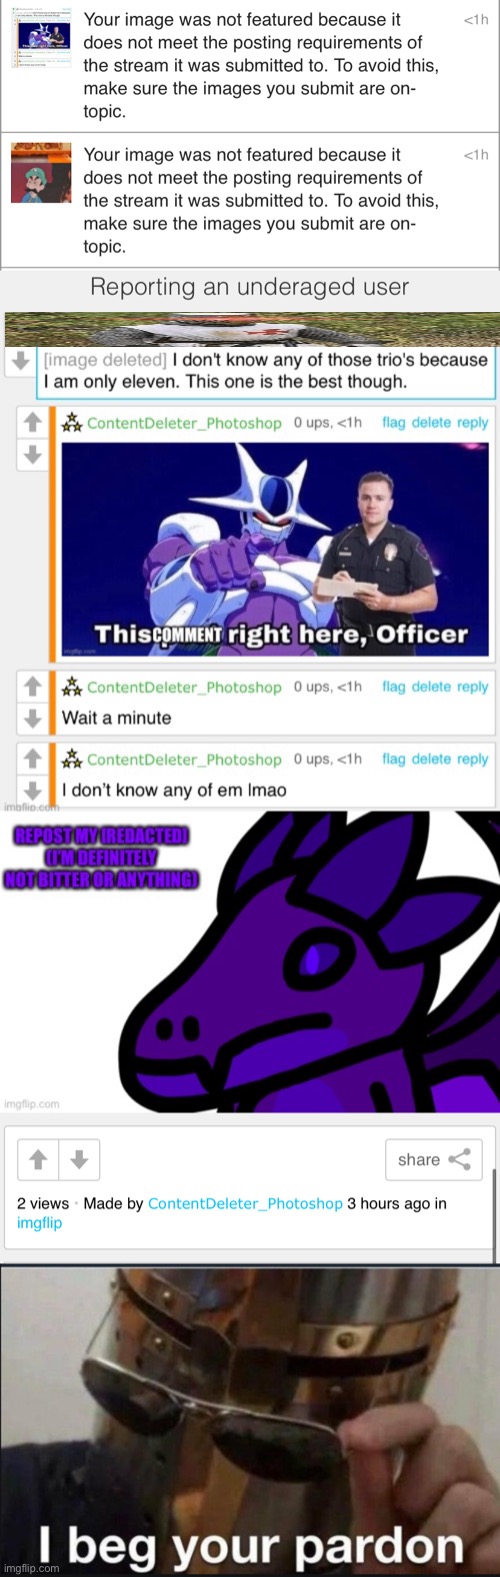 The post where I reported a user I agree with I shouldn’t have done that, but asking why my fun stream meme was disapproved? Rea | image tagged in i beg your pardon | made w/ Imgflip meme maker